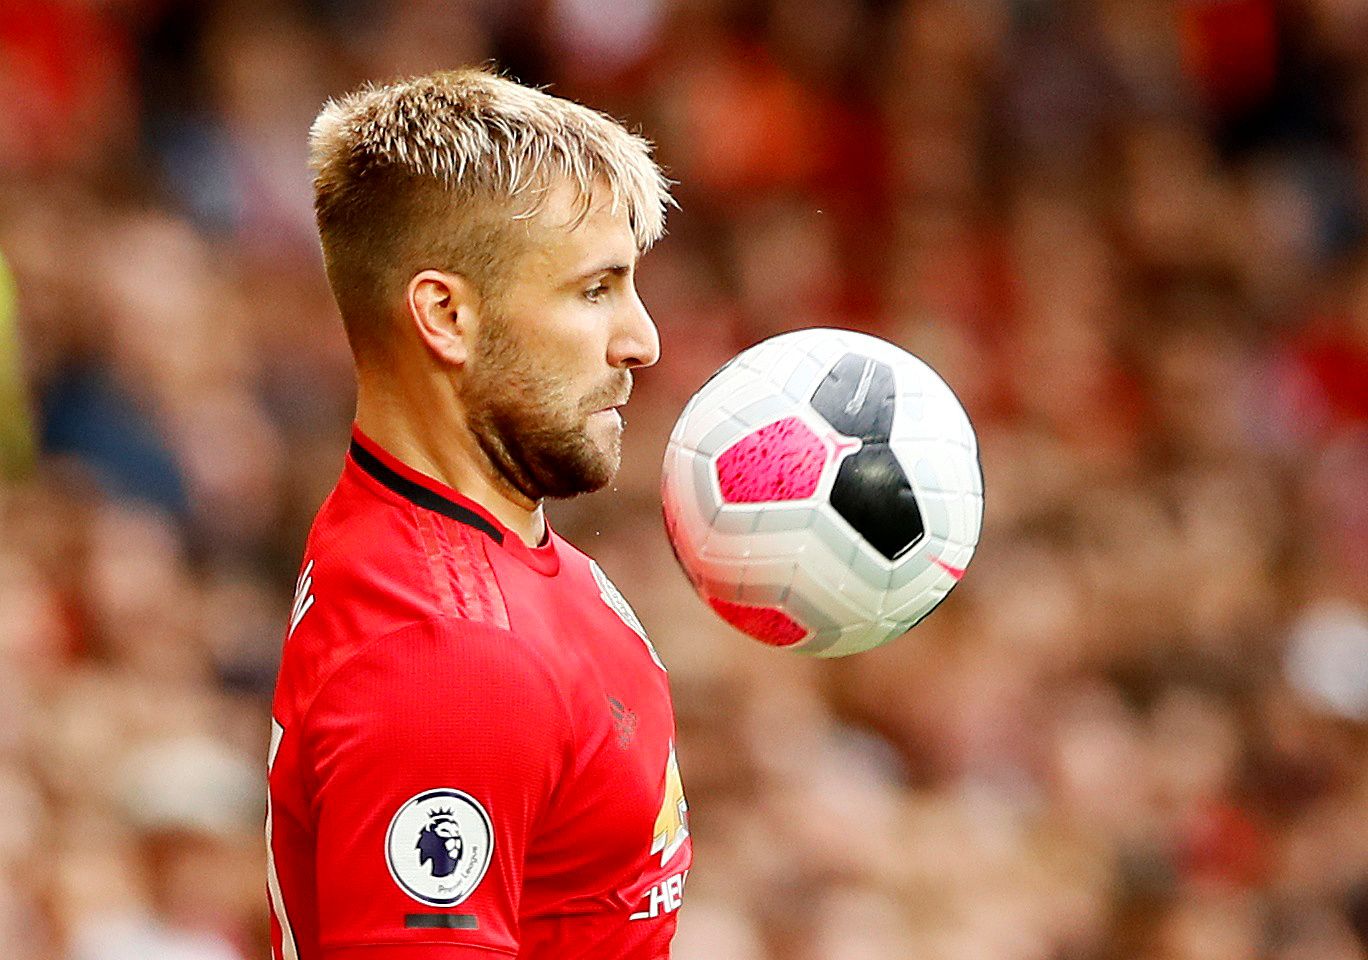 Soccer Football - Premier League - Manchester United v Chelsea - Old Trafford, Manchester, Britain - August 11, 2019  Manchester United's Luke Shaw in action  Action Images via Reuters/Jason Cairnduff  EDITORIAL USE ONLY. No use with unauthorized audio, video, data, fixture lists, club/league logos or 